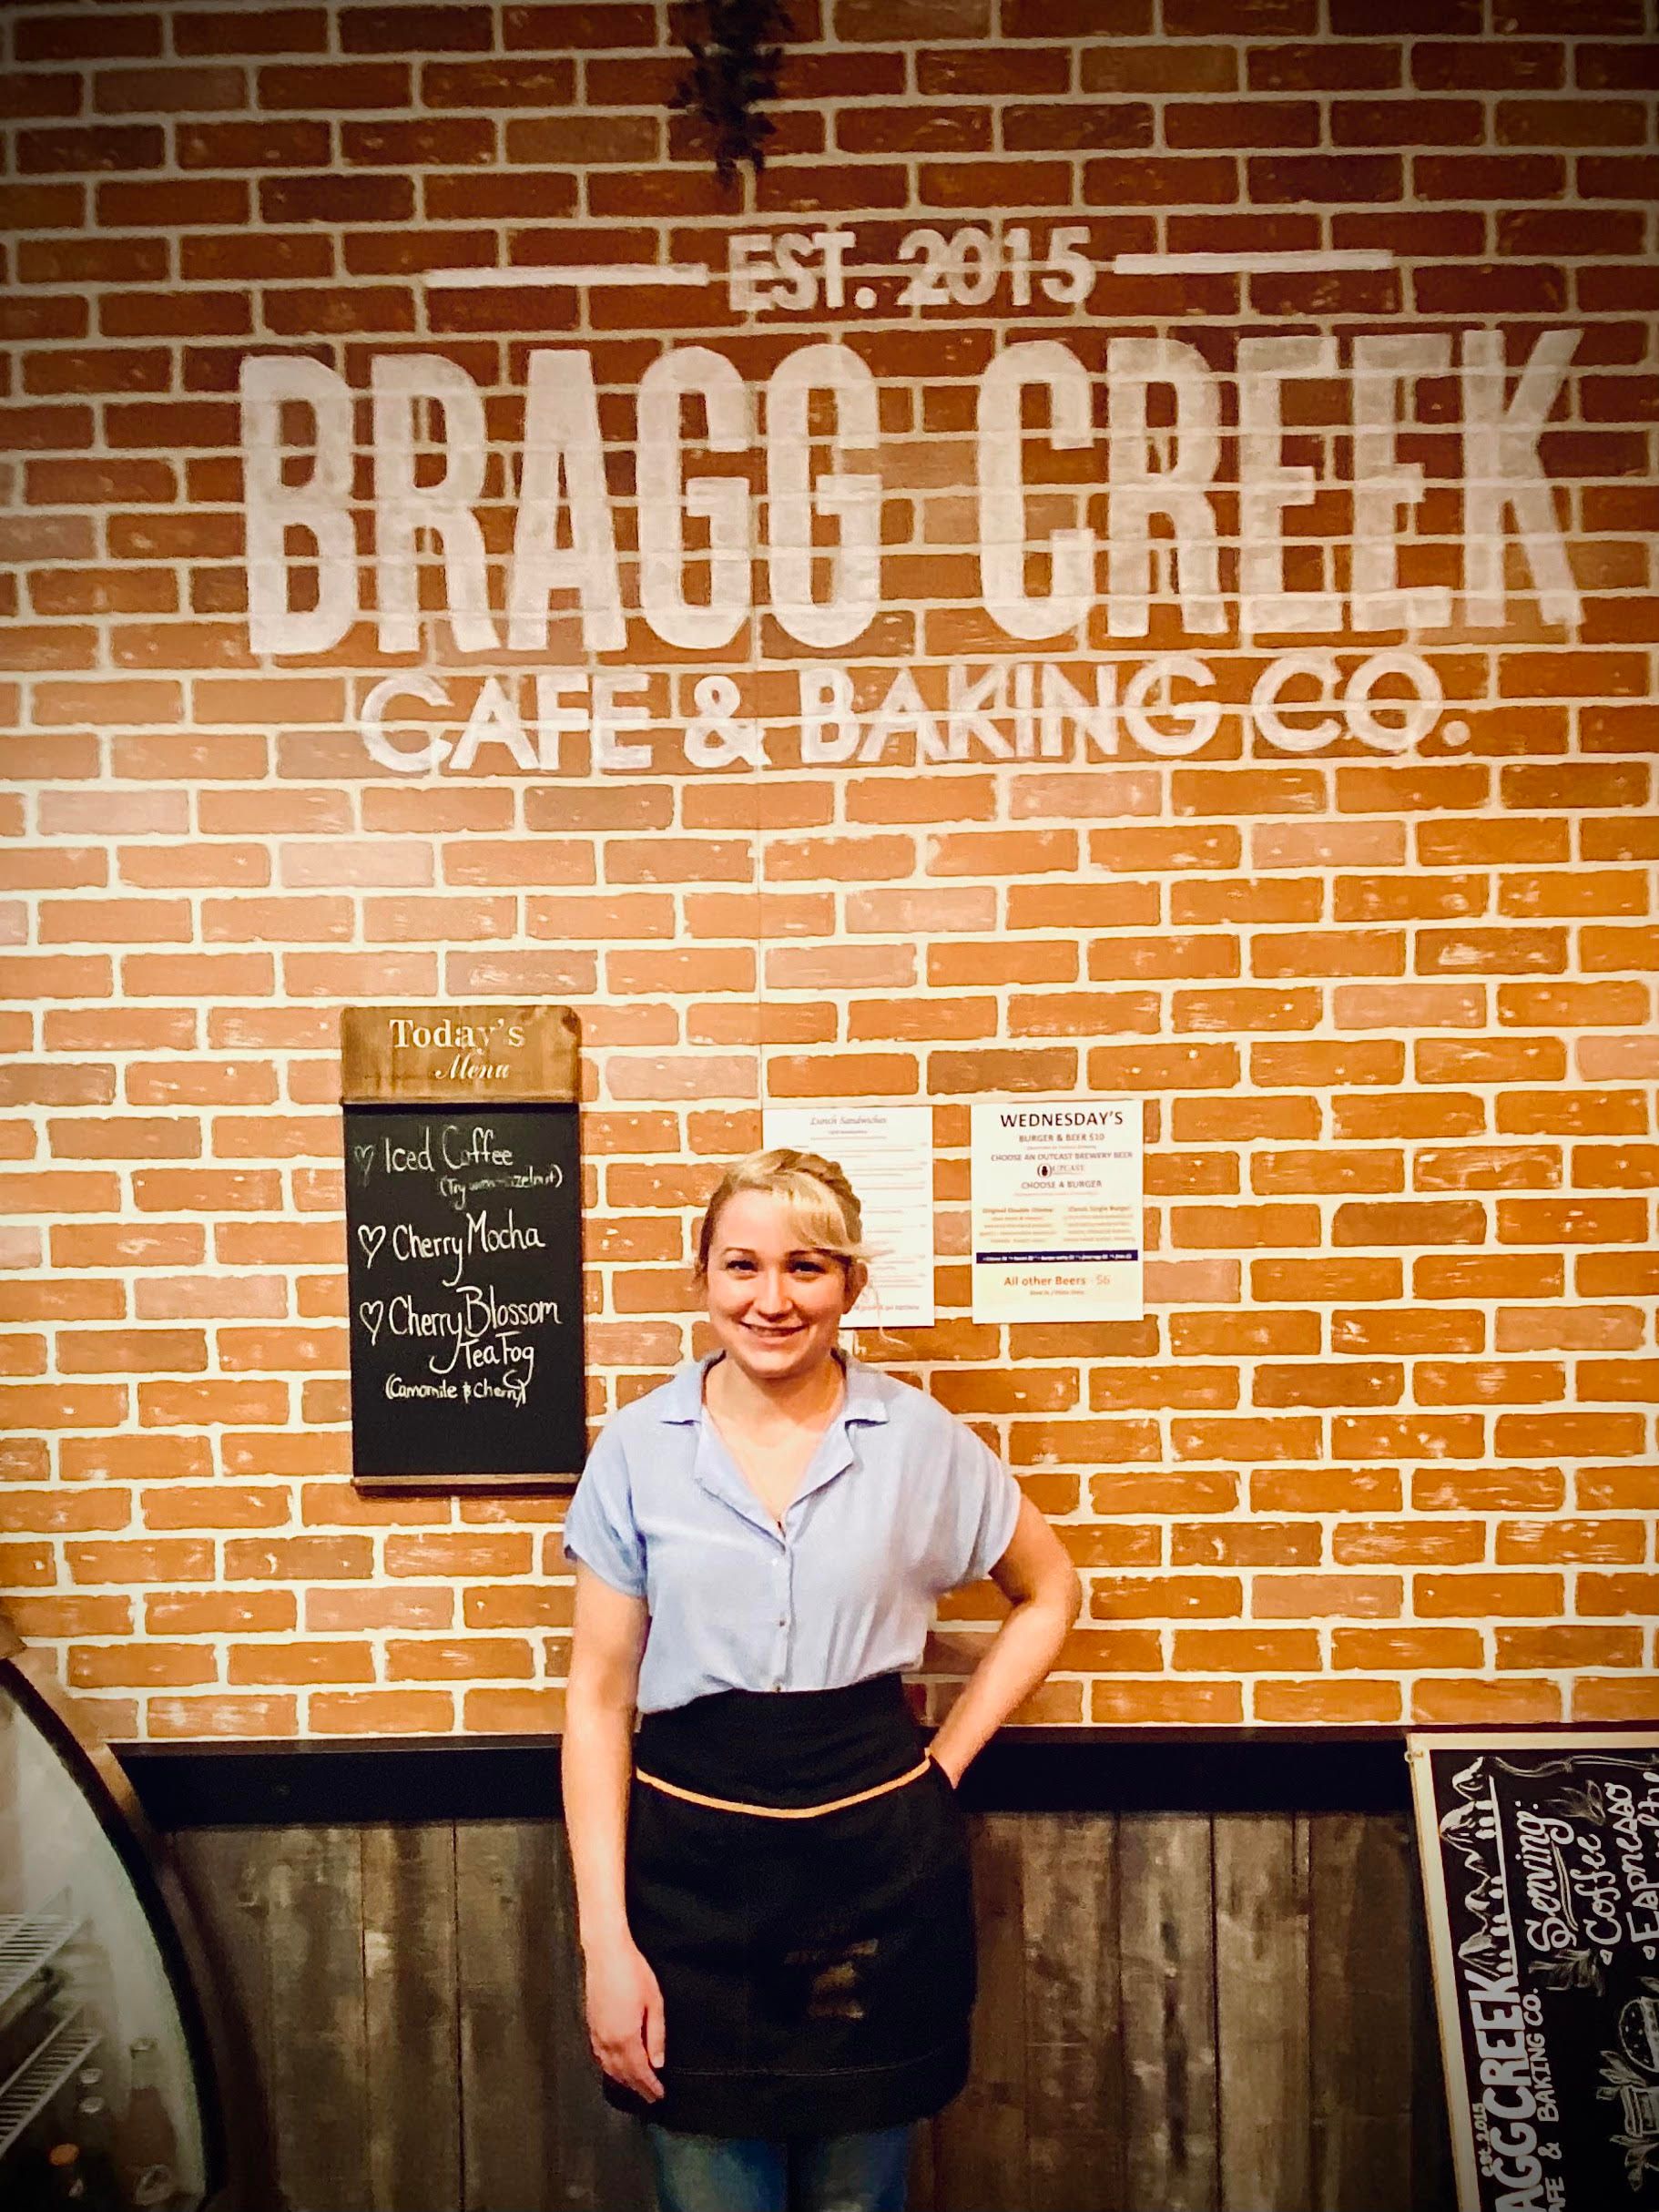 Scratch Made in-house Baking - The Bragg Creek Cafe & Baking Co.